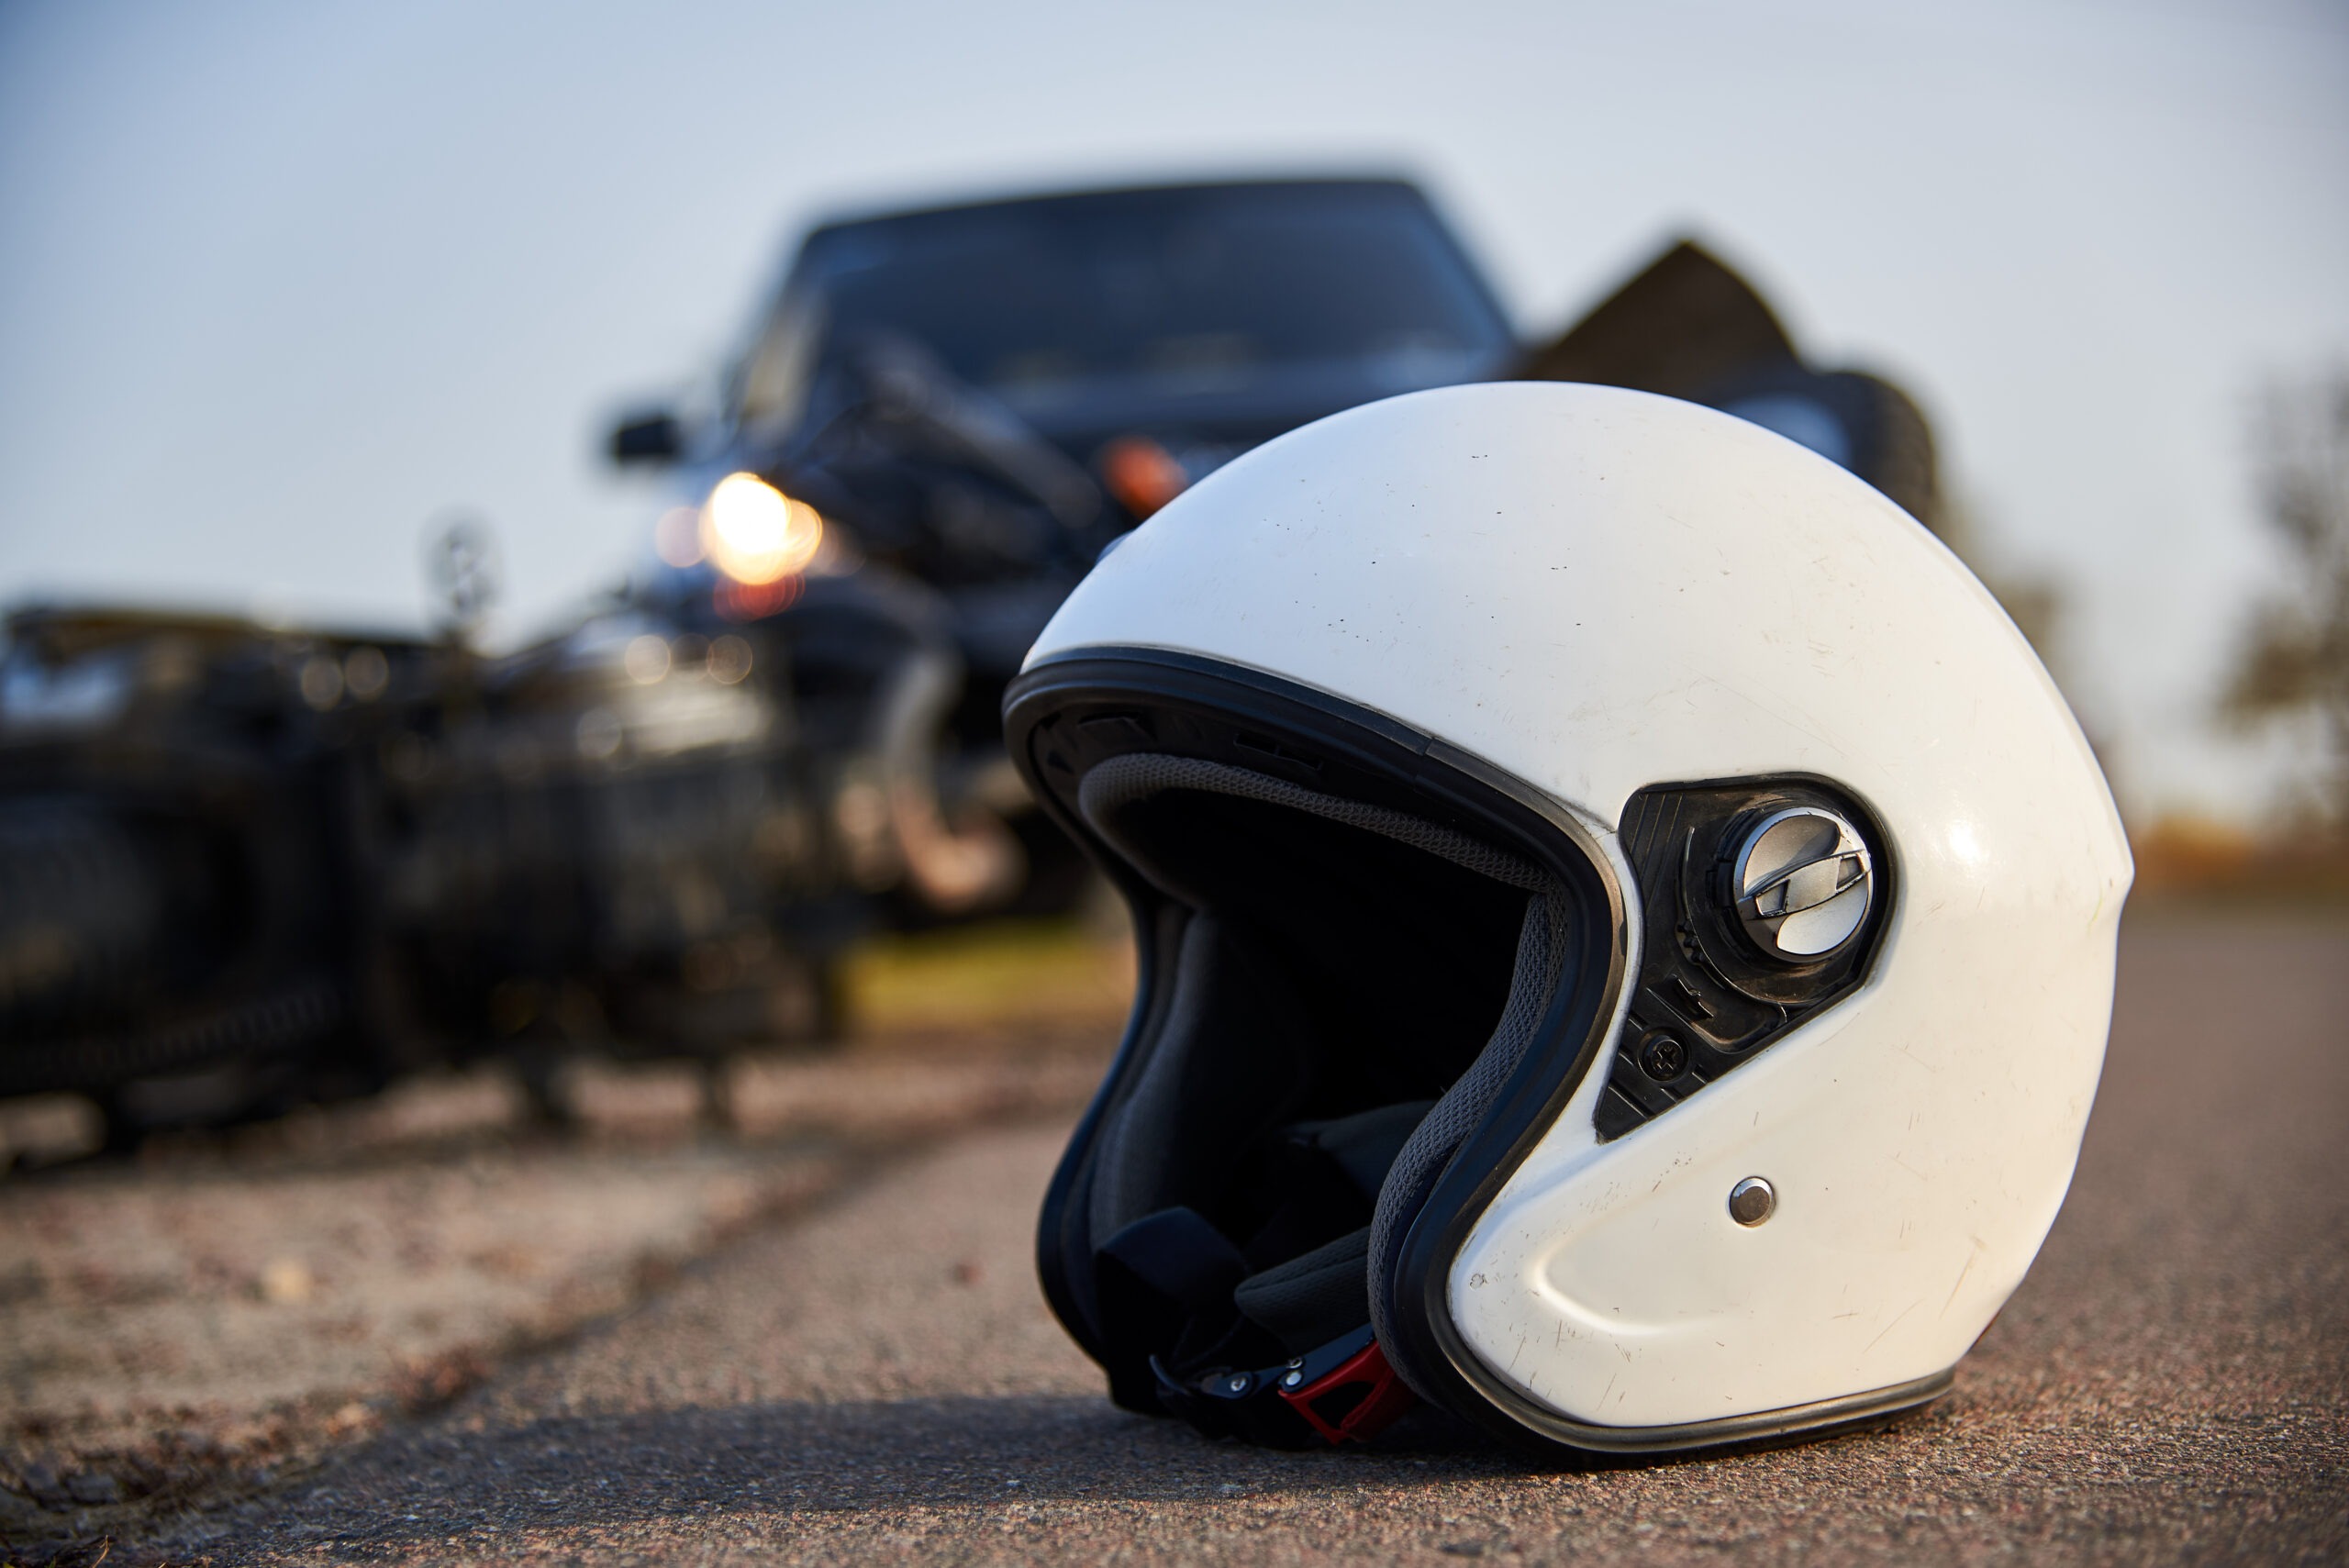 What Can I Do to Protect My Rights After a Motorcycle Accident?